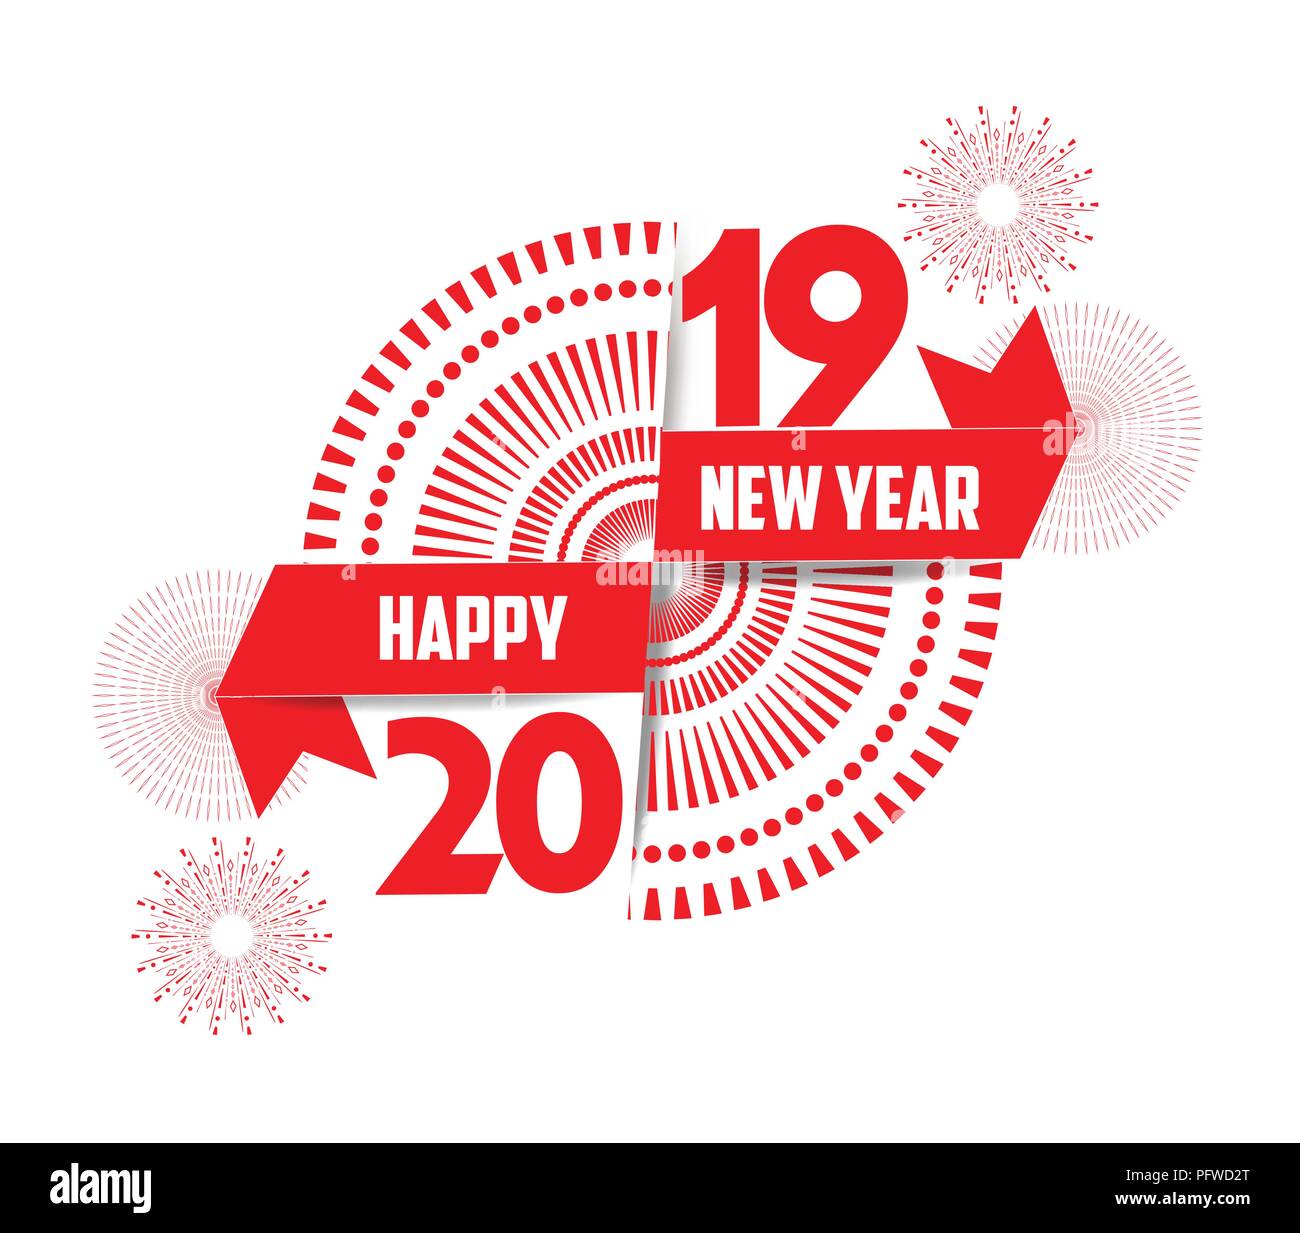 Vector illustration of fireworks. Happy new year 2019 background Stock Vector